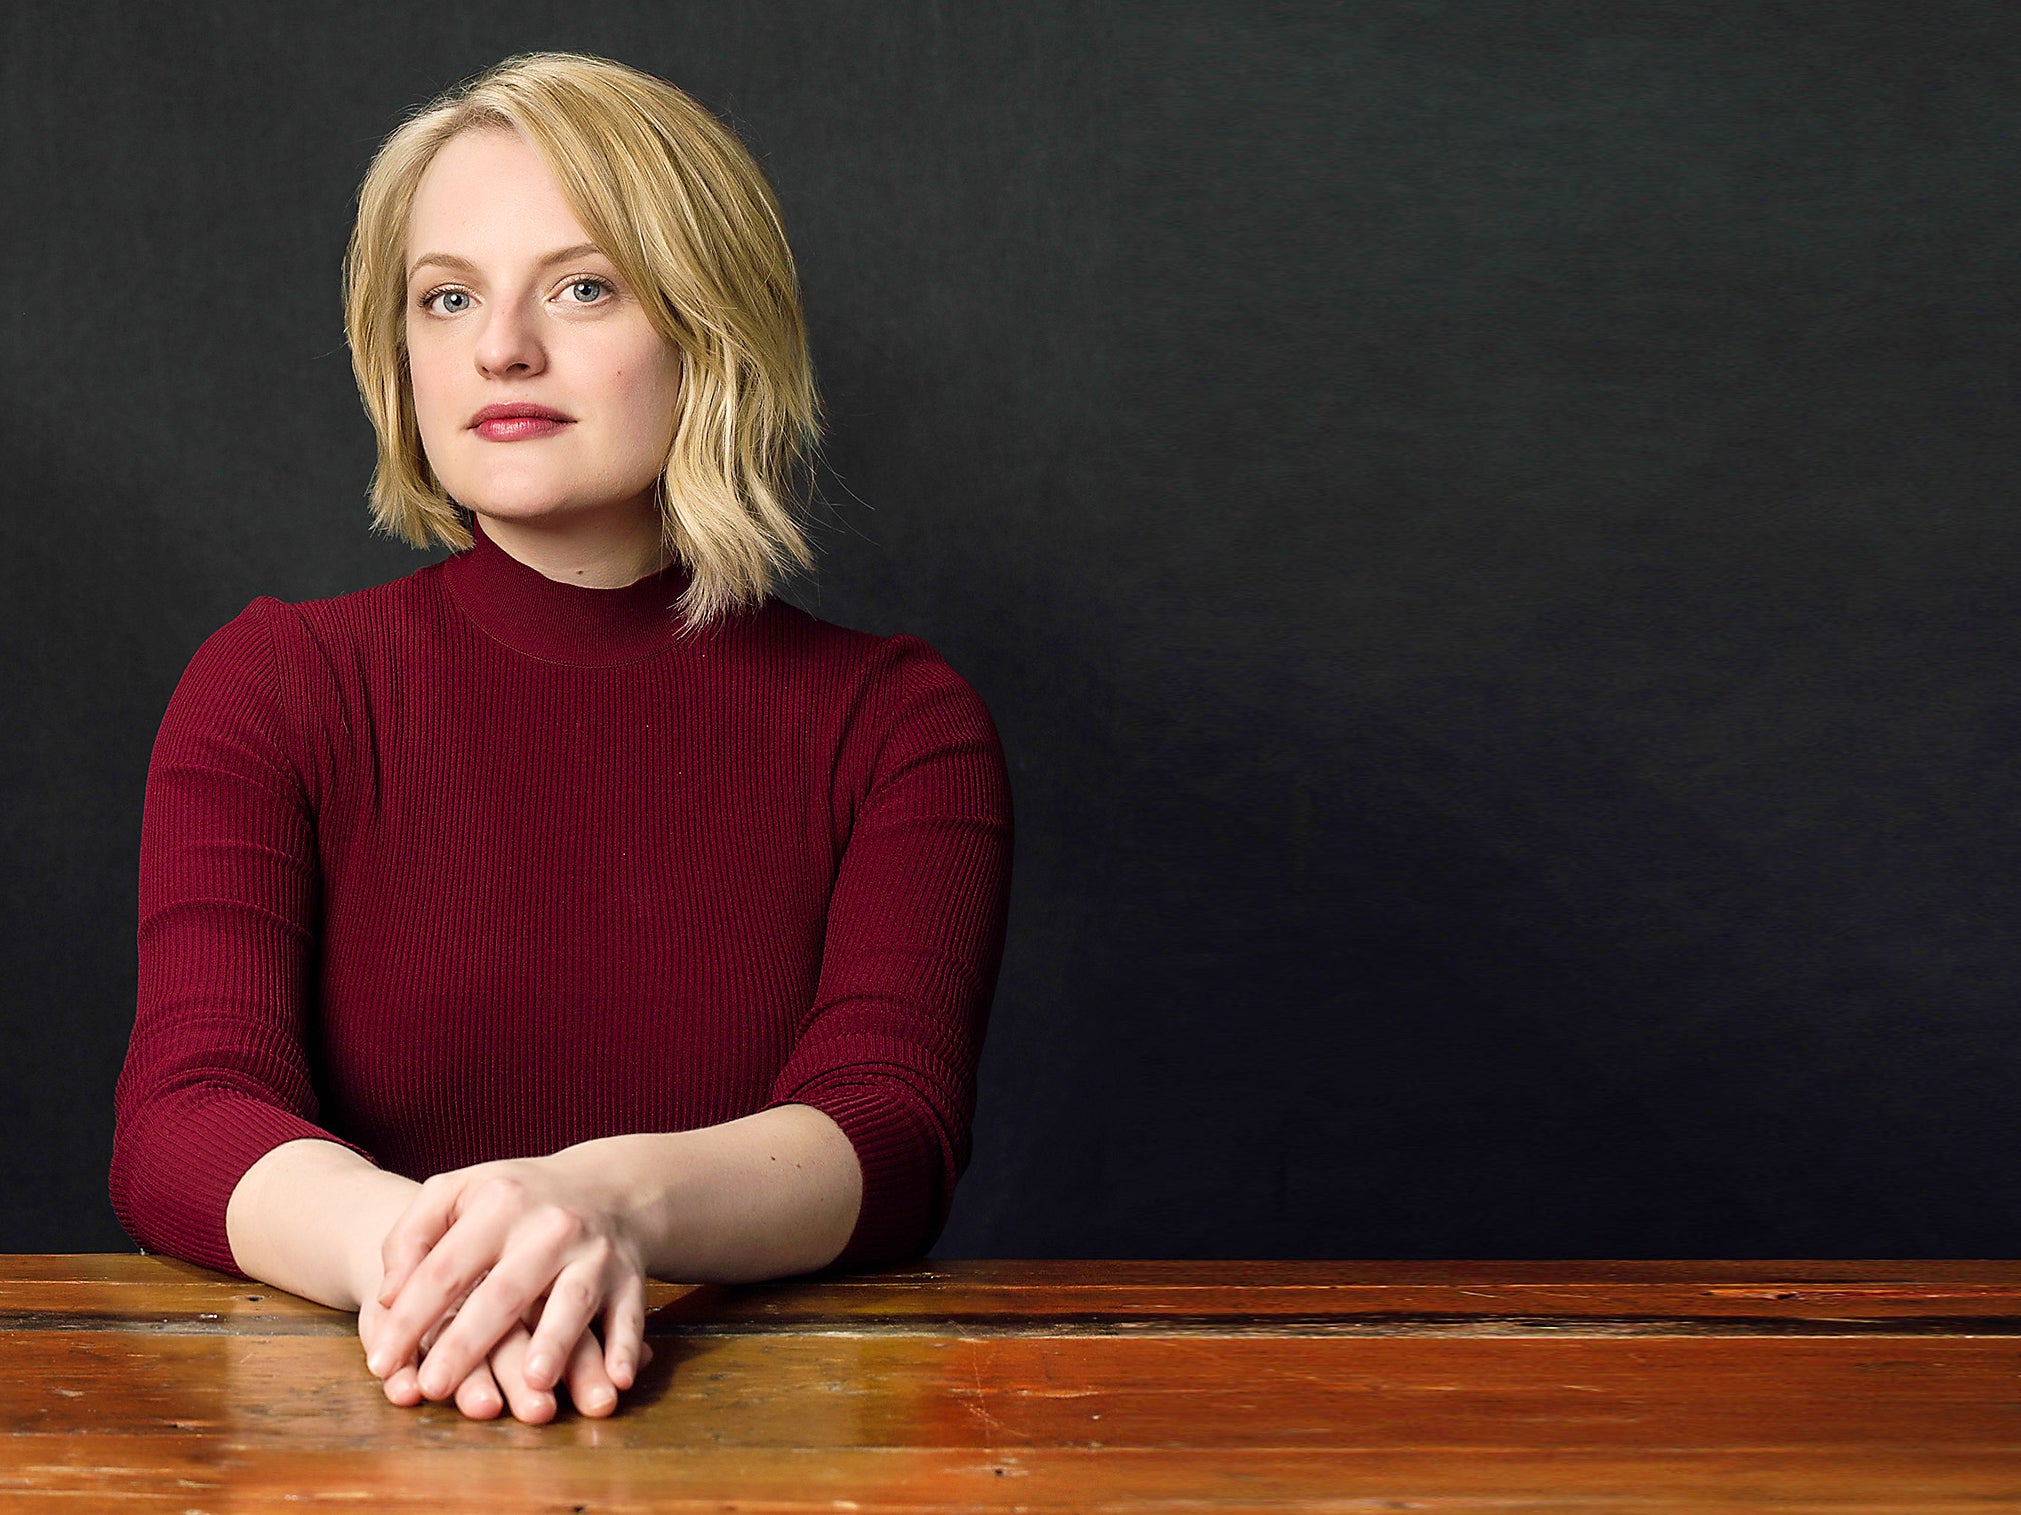 'Mad Men' actress Elisabeth Moss stars in ‘The Handmaid’s Tale’